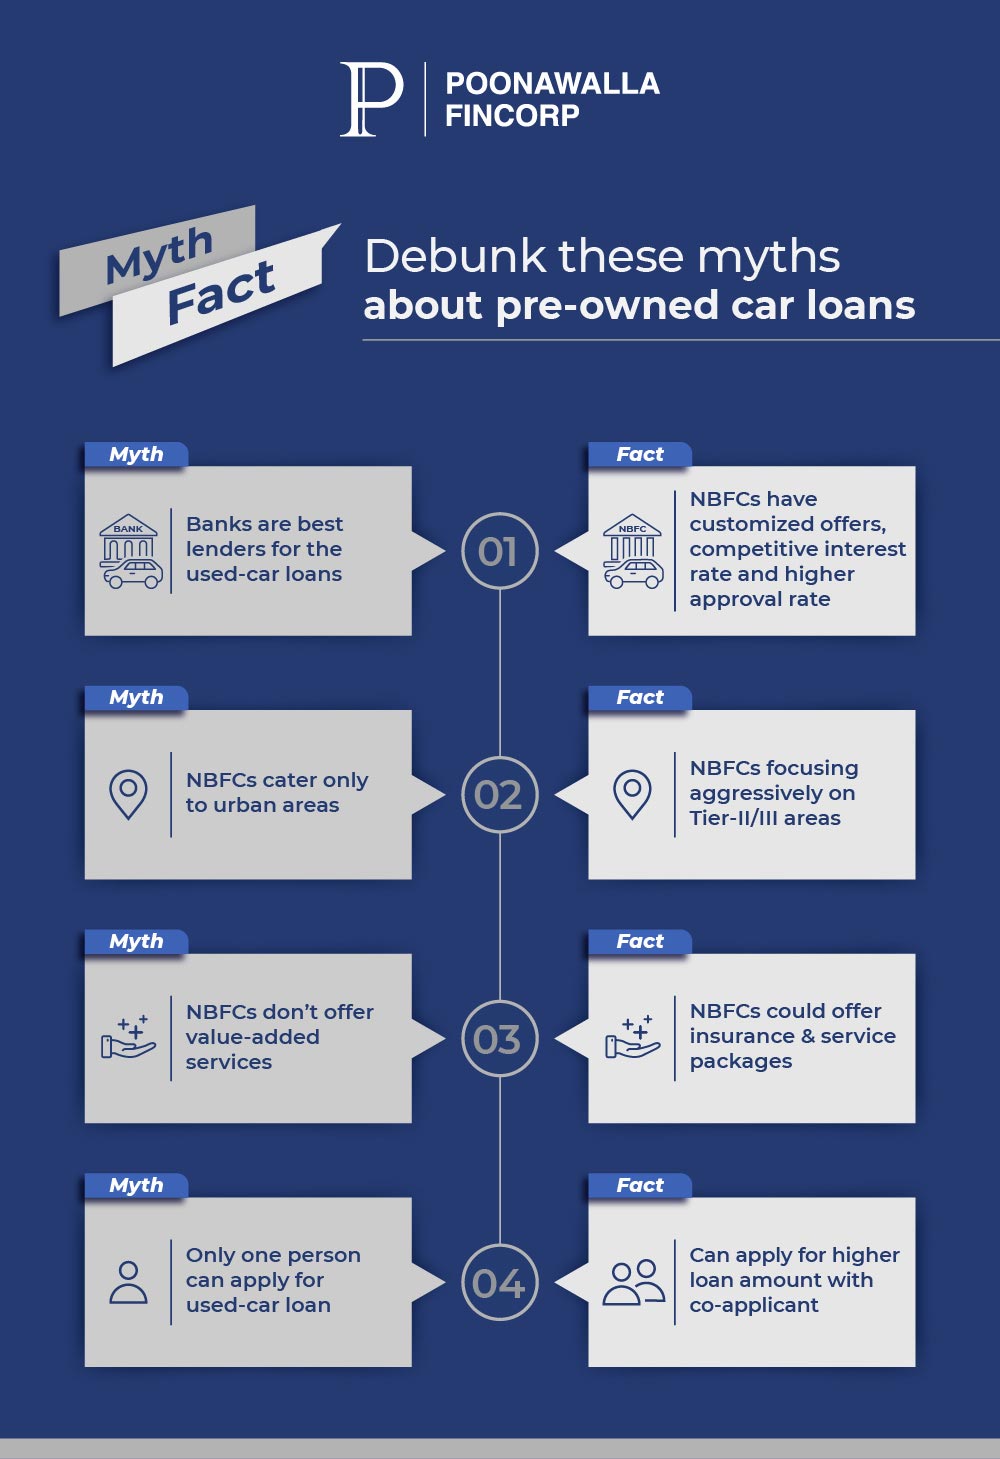 Myths about pre-owned car loans